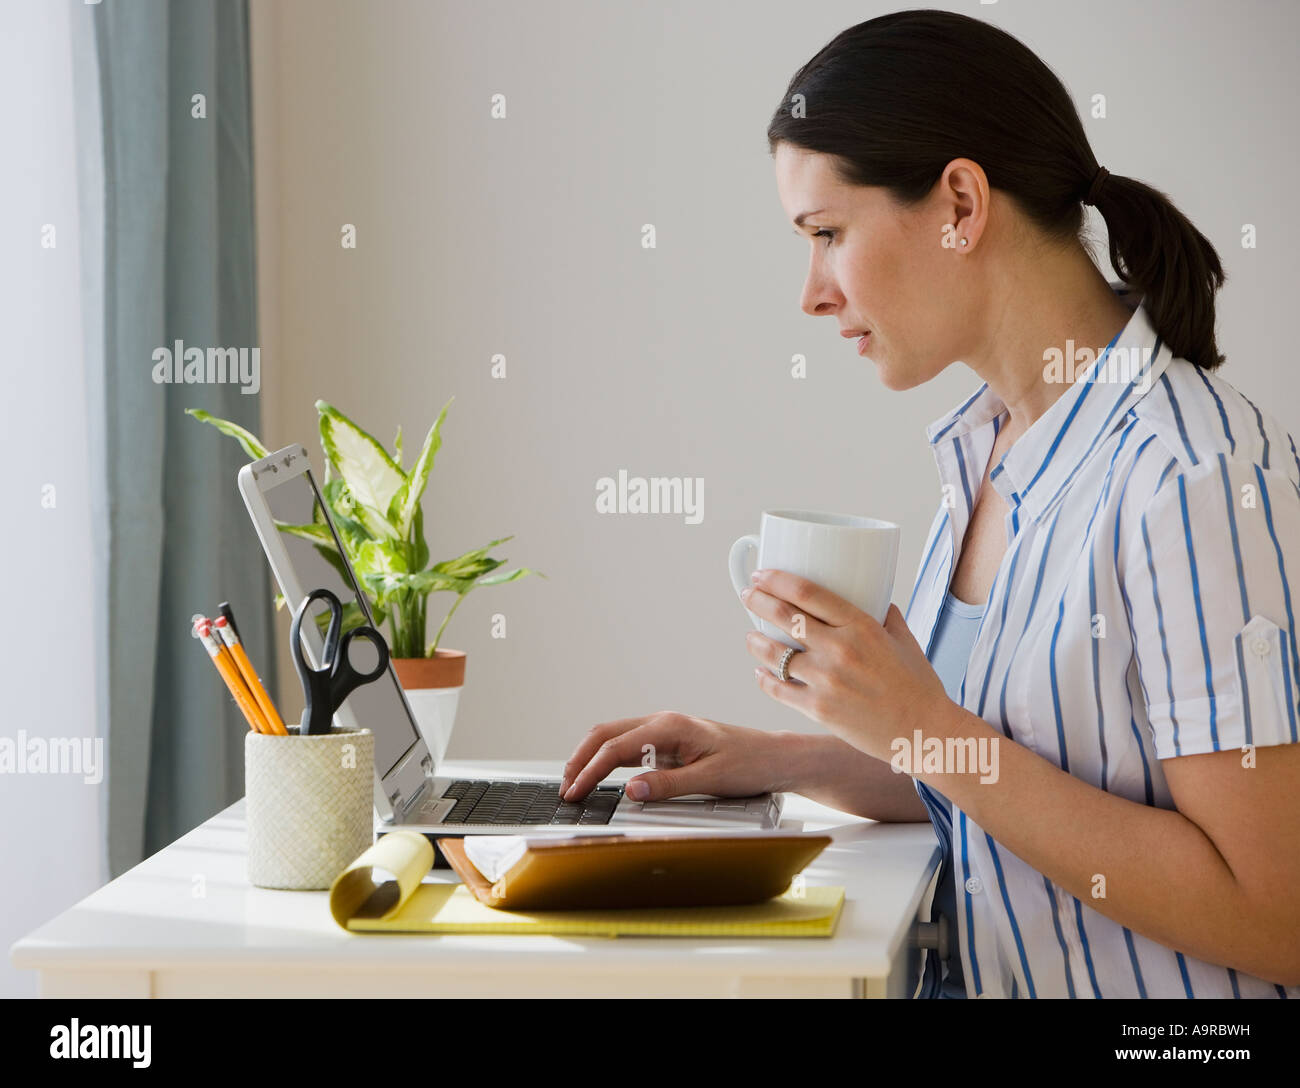 Woman typing on laptop Banque D'Images